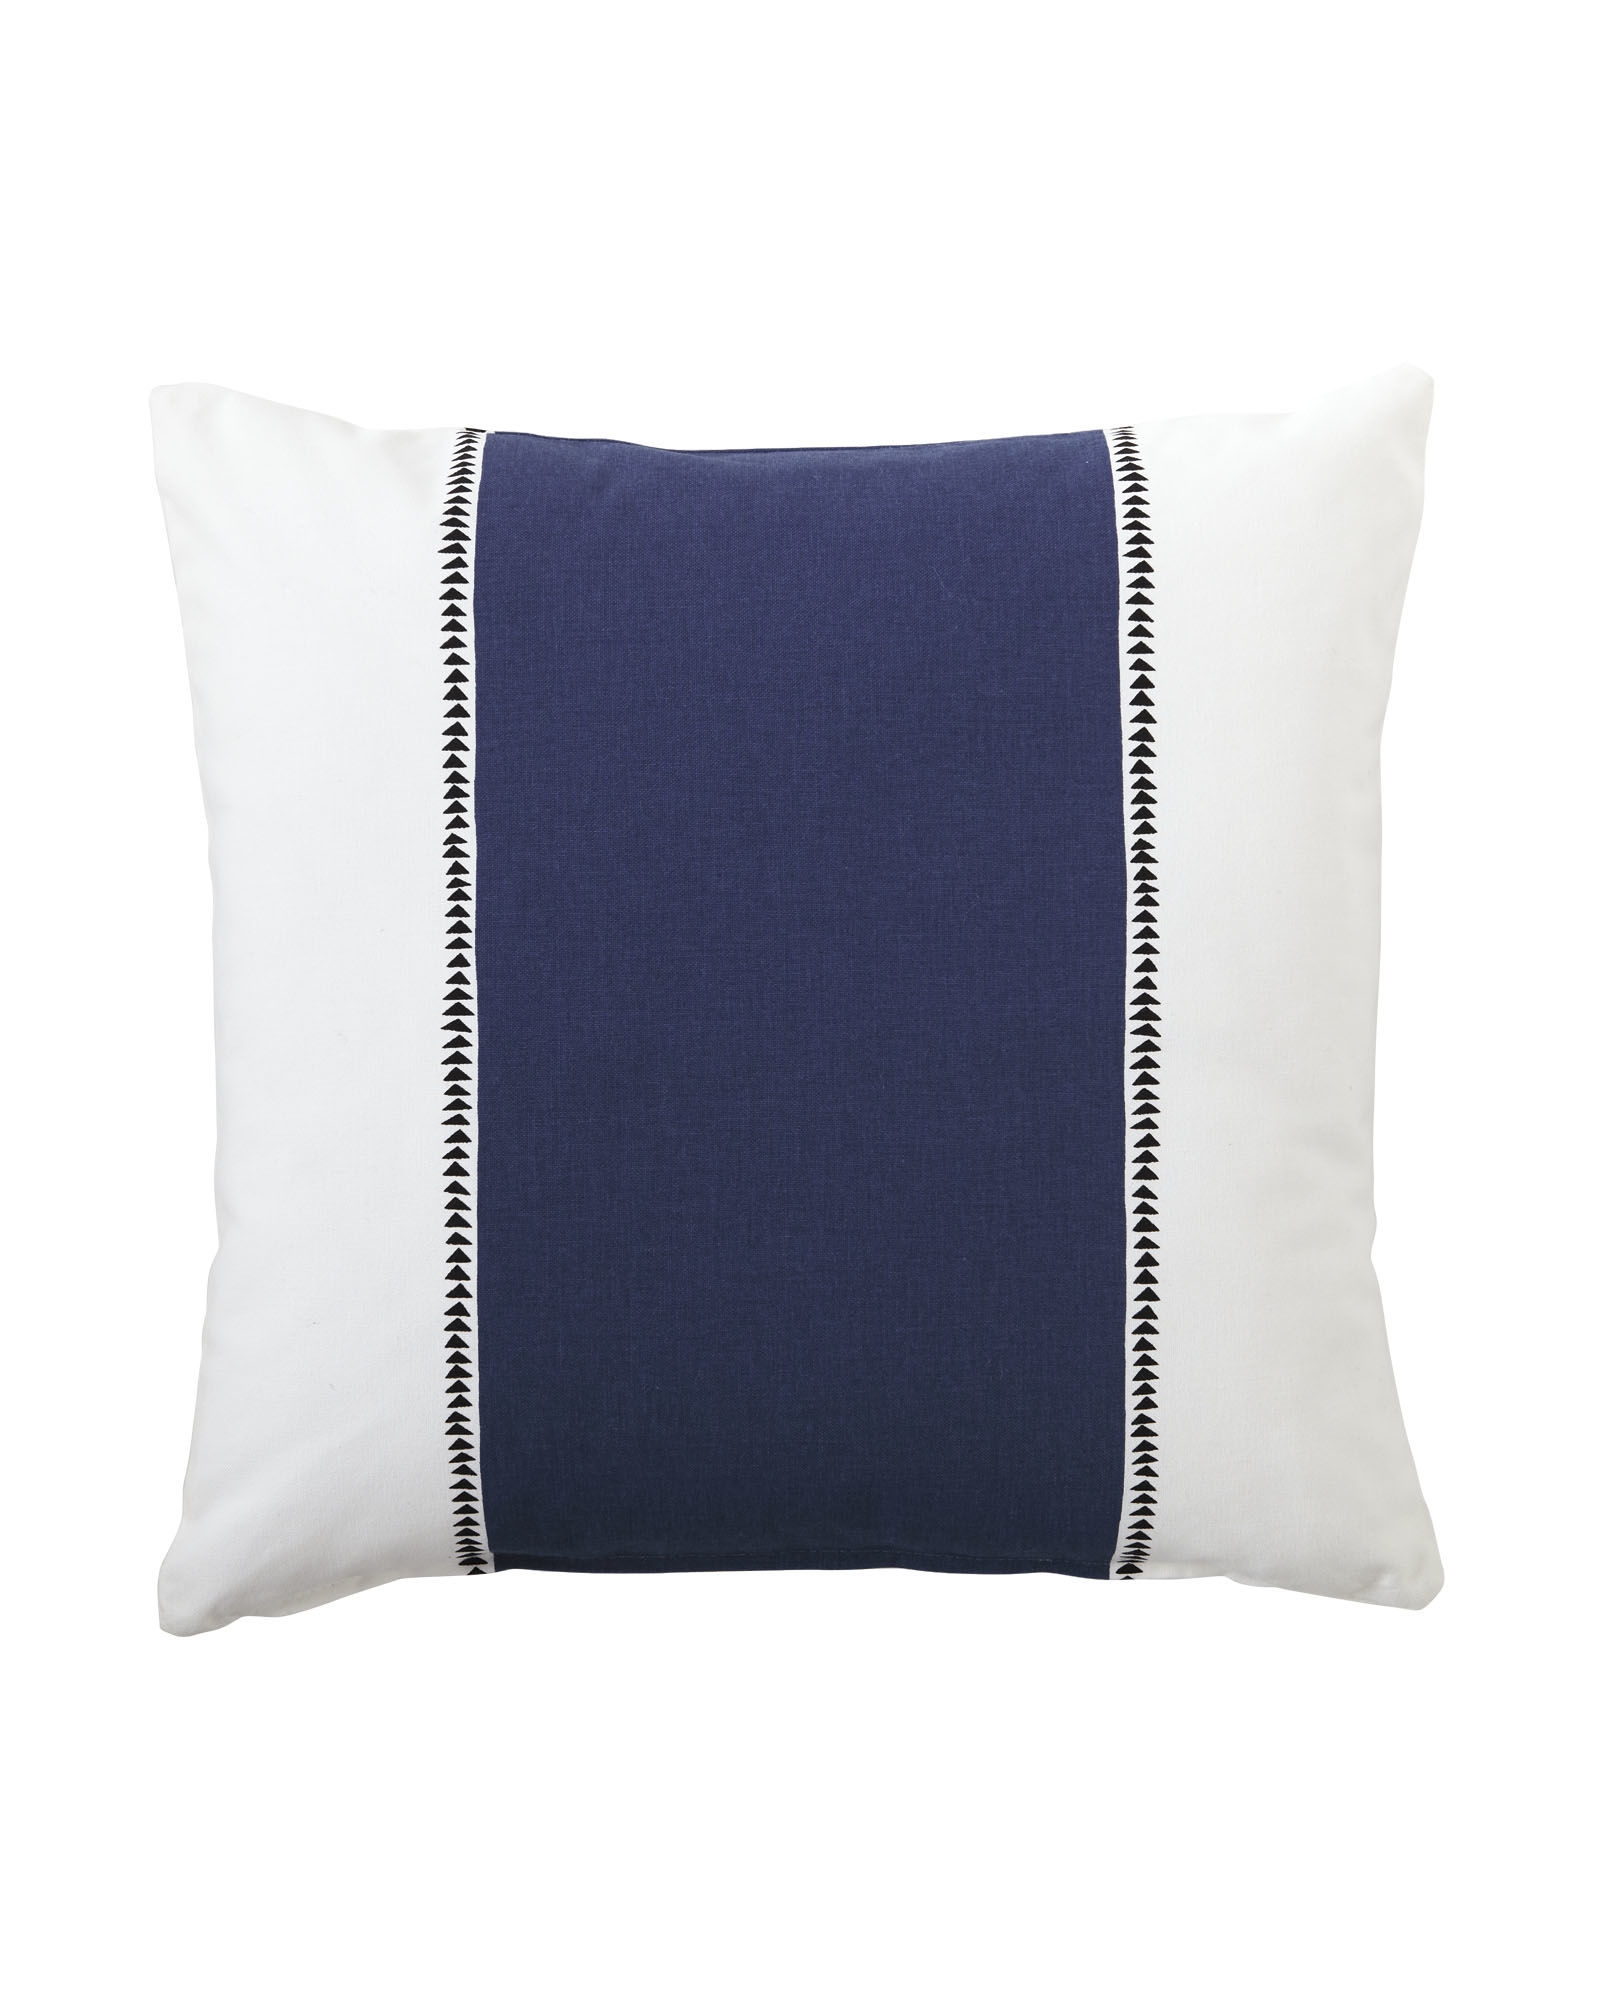 Racing Stripe Pillow Cover Navy, 20"x20"- No Insert - Image 0